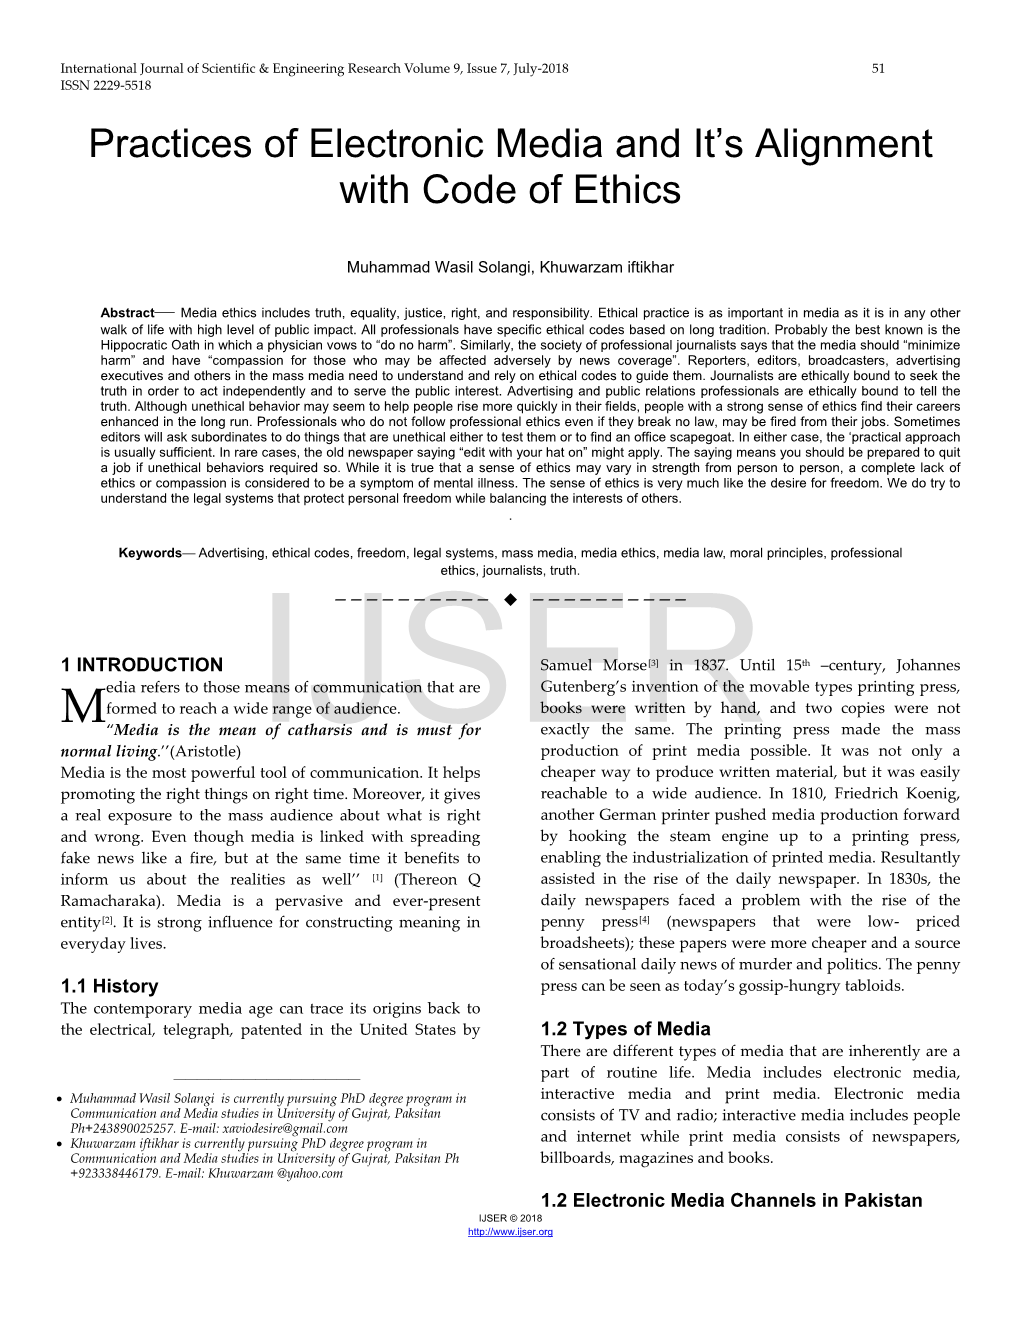 Practices of Electronic Media and It's Alignment with Code of Ethics